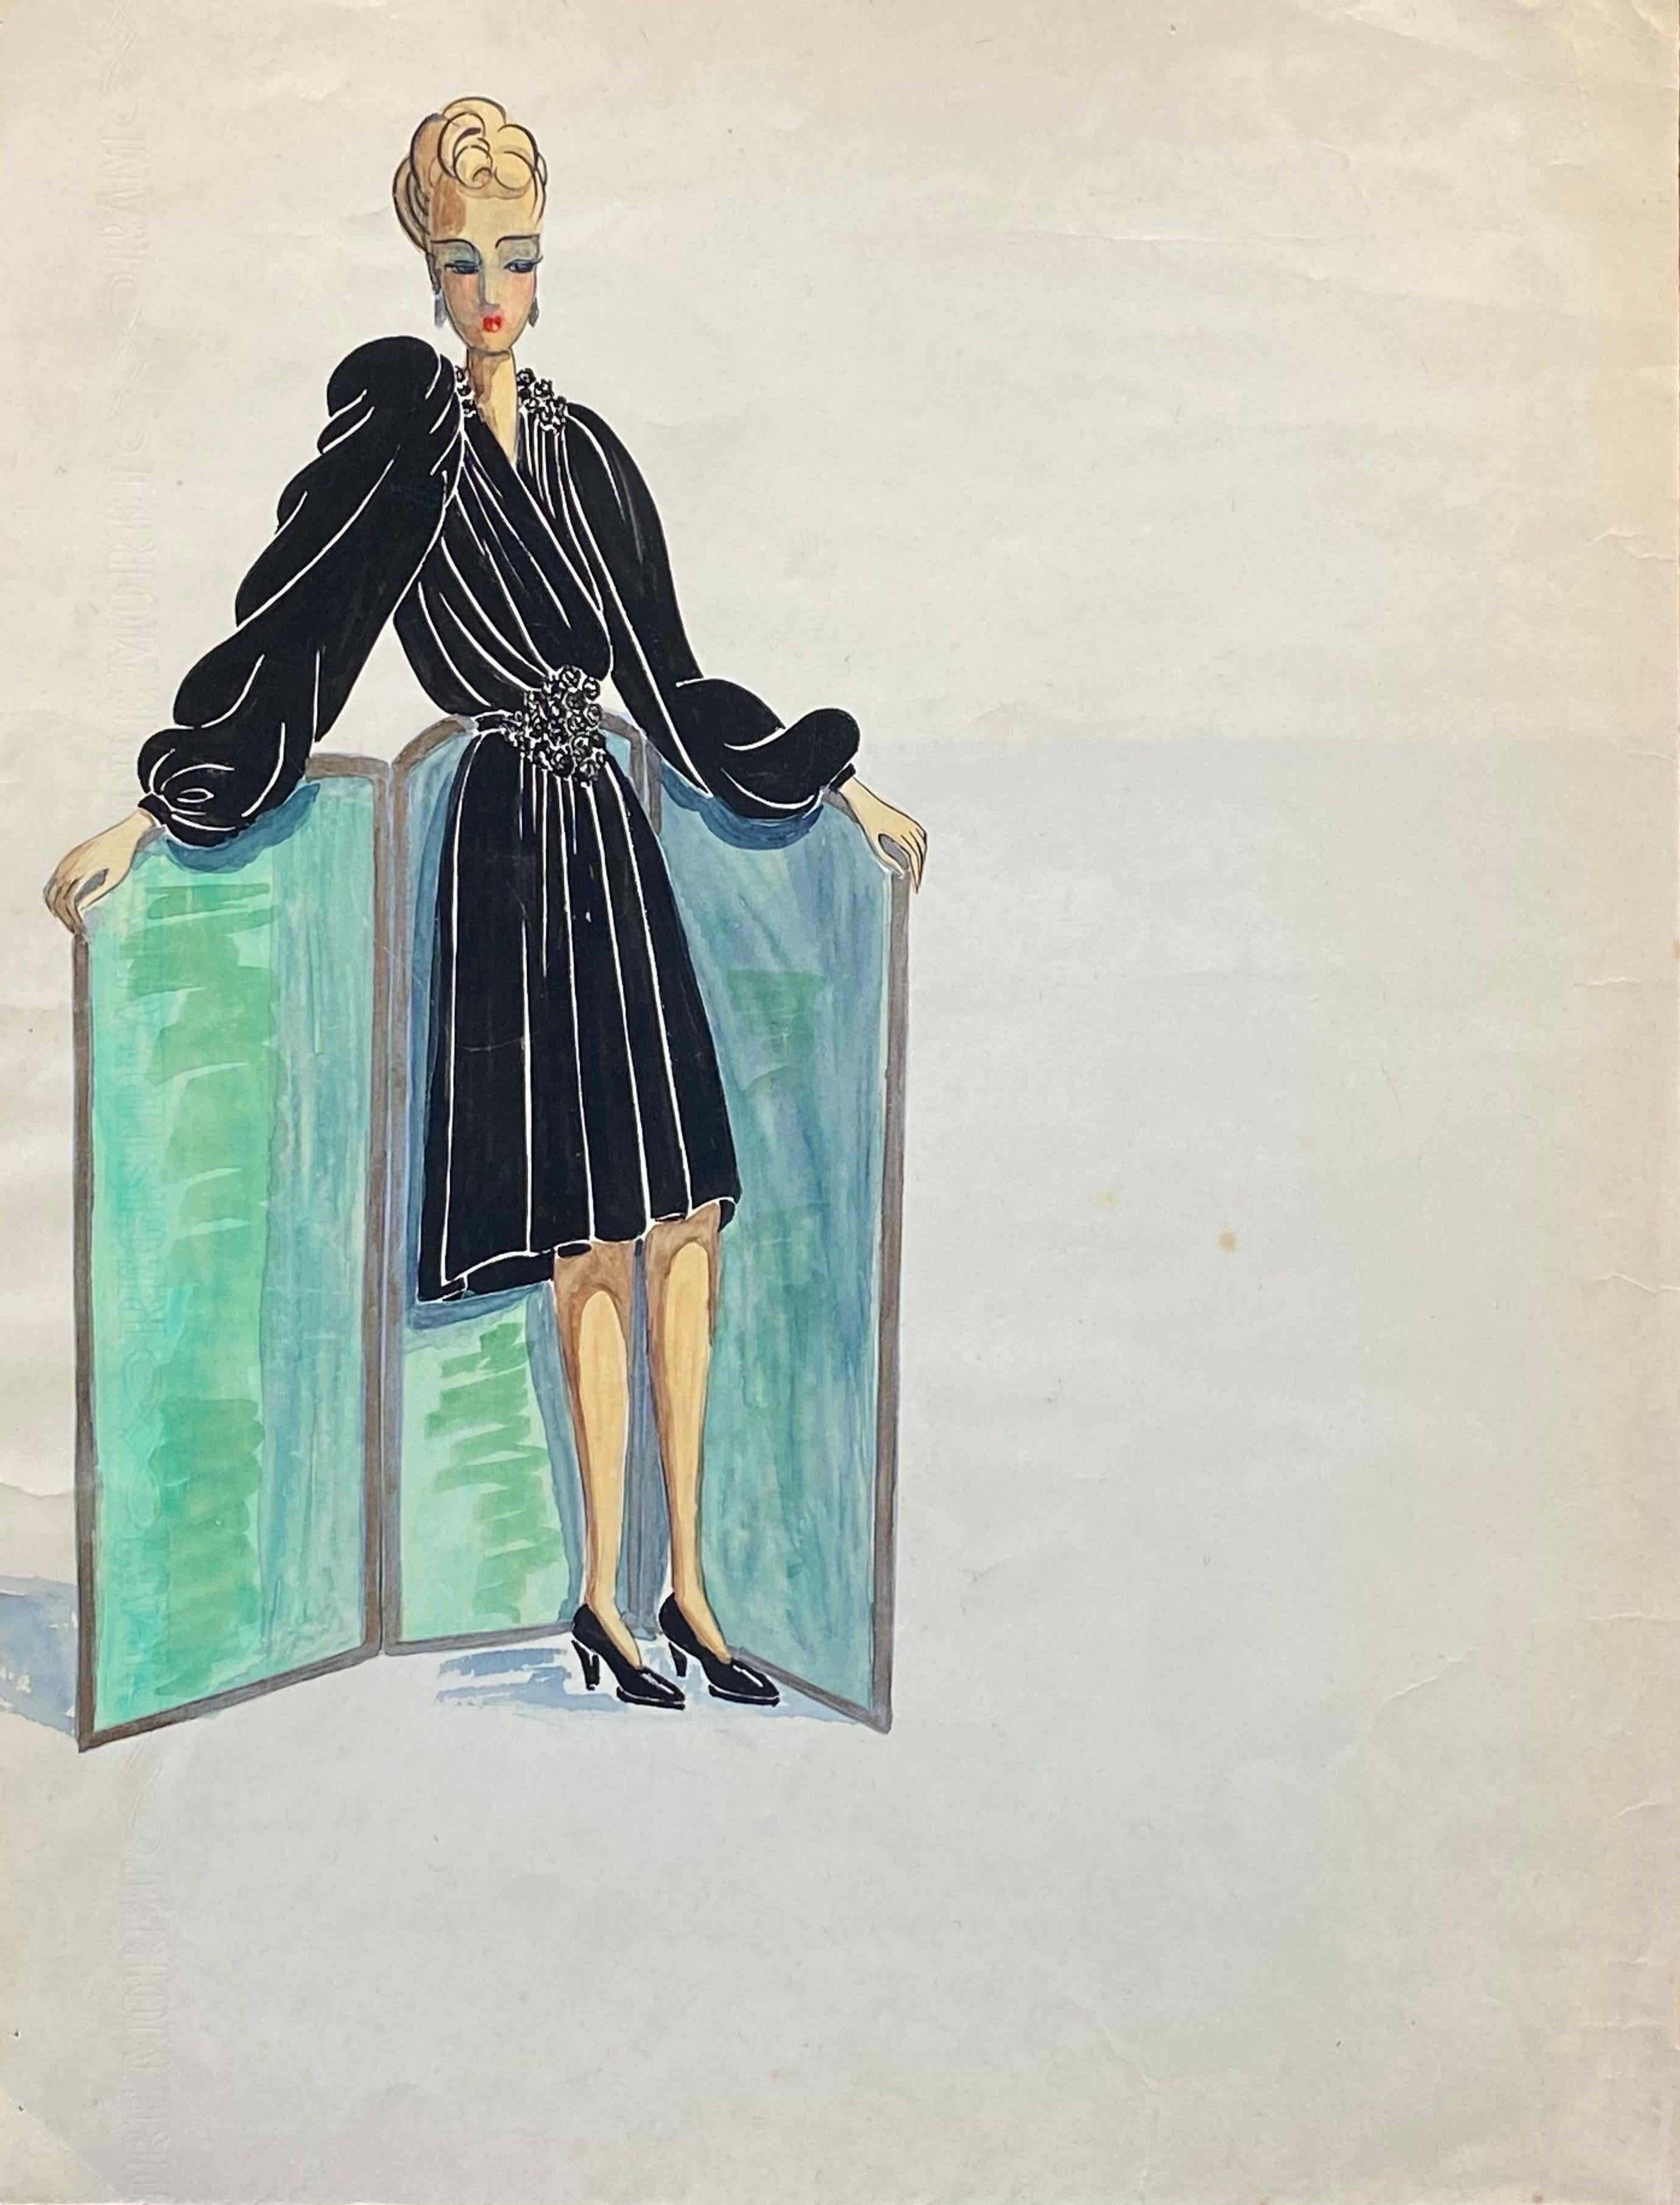 1940's Fashion Illustration - Chanel Styled Woman In Chic Black Dress - Painting by Geneviève Thomas